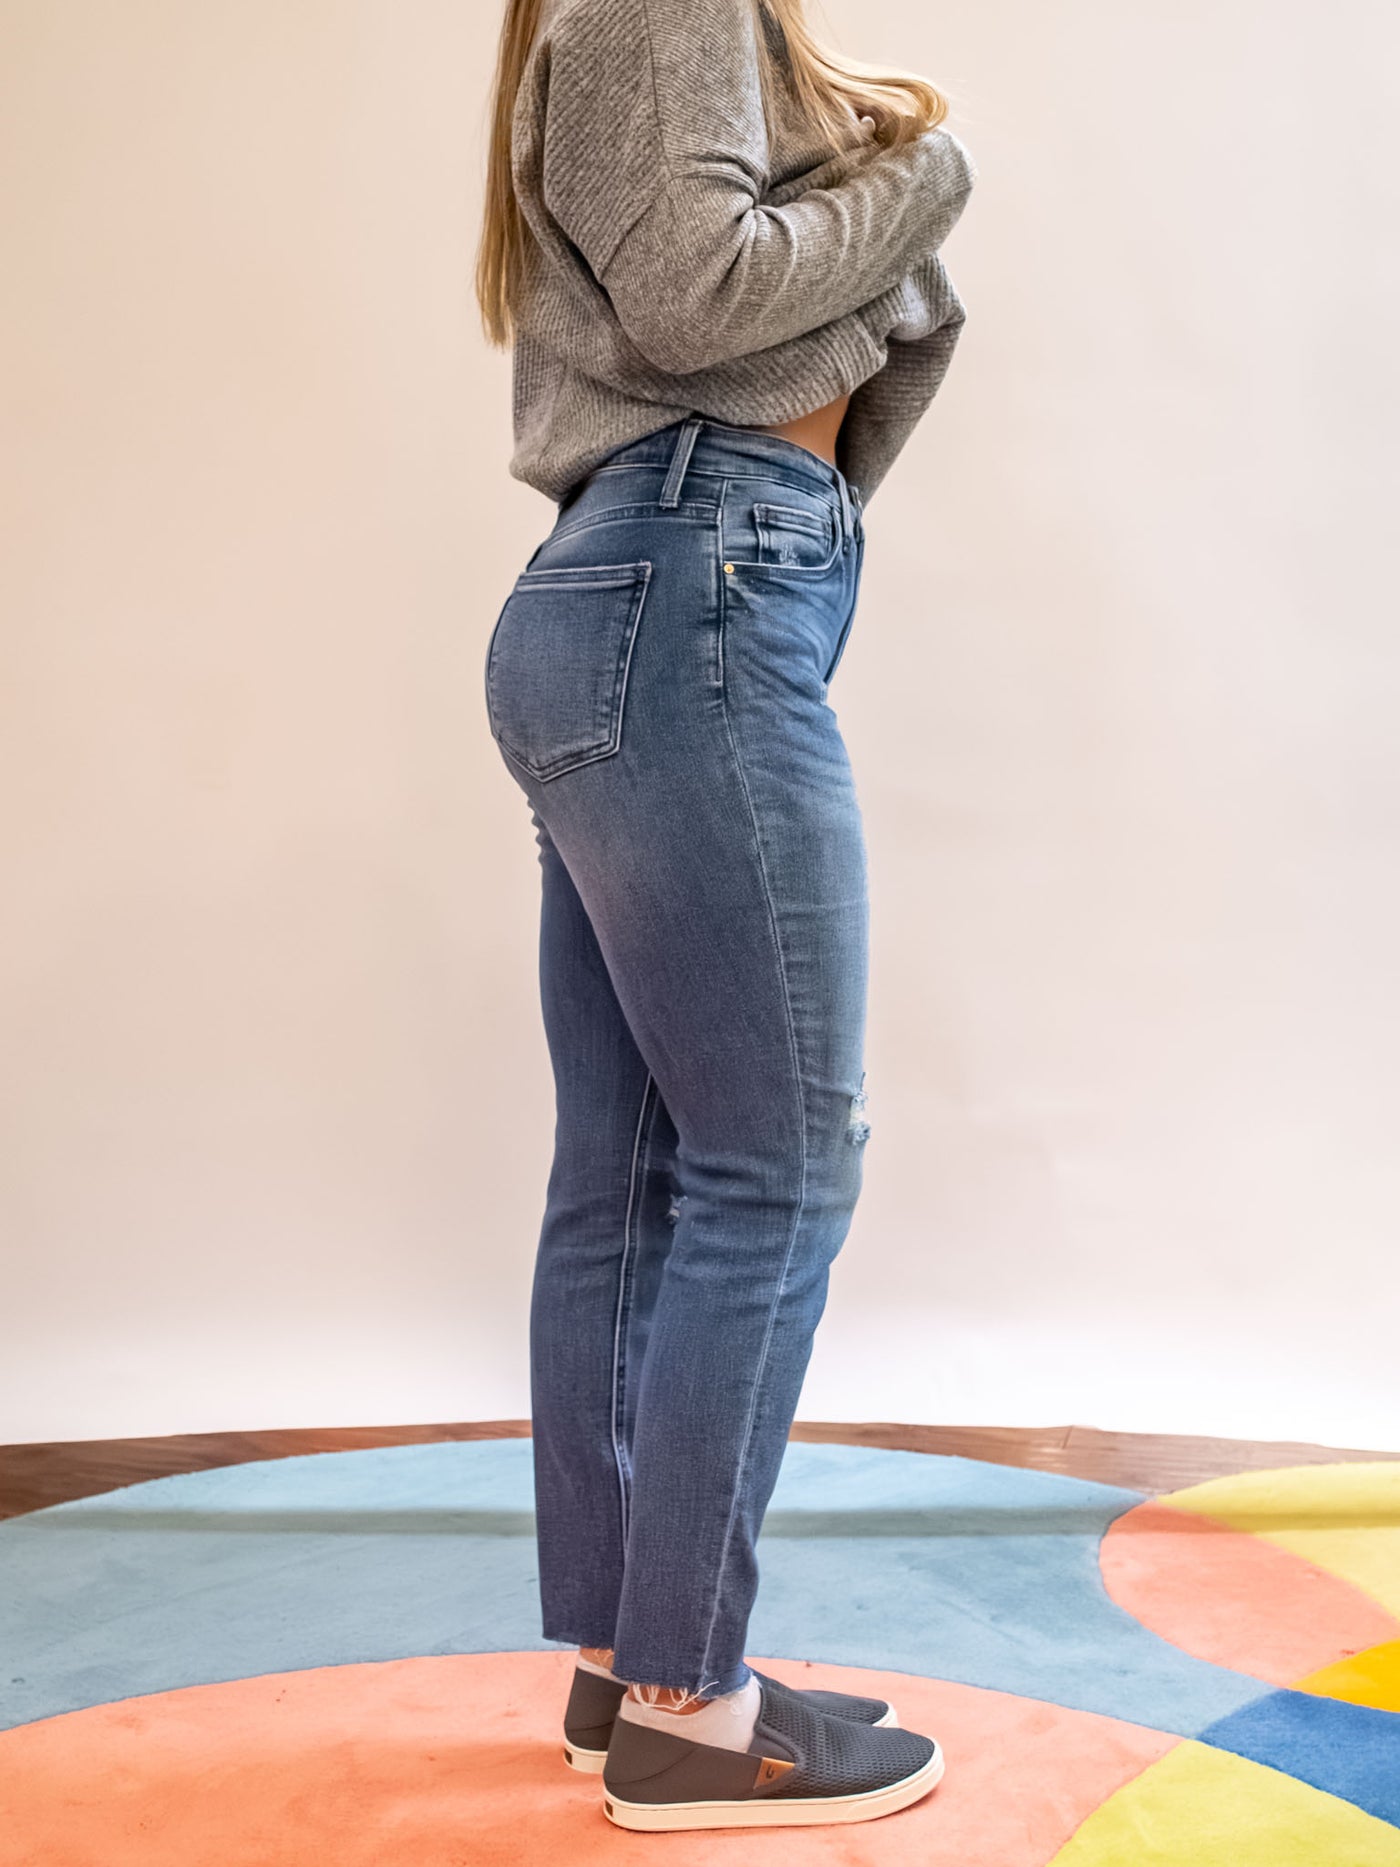 A model wearing a pair of medium washed jeans with holes and distressing and an unfinished hem. The model has it paired with a gray sweater and gray loafers.